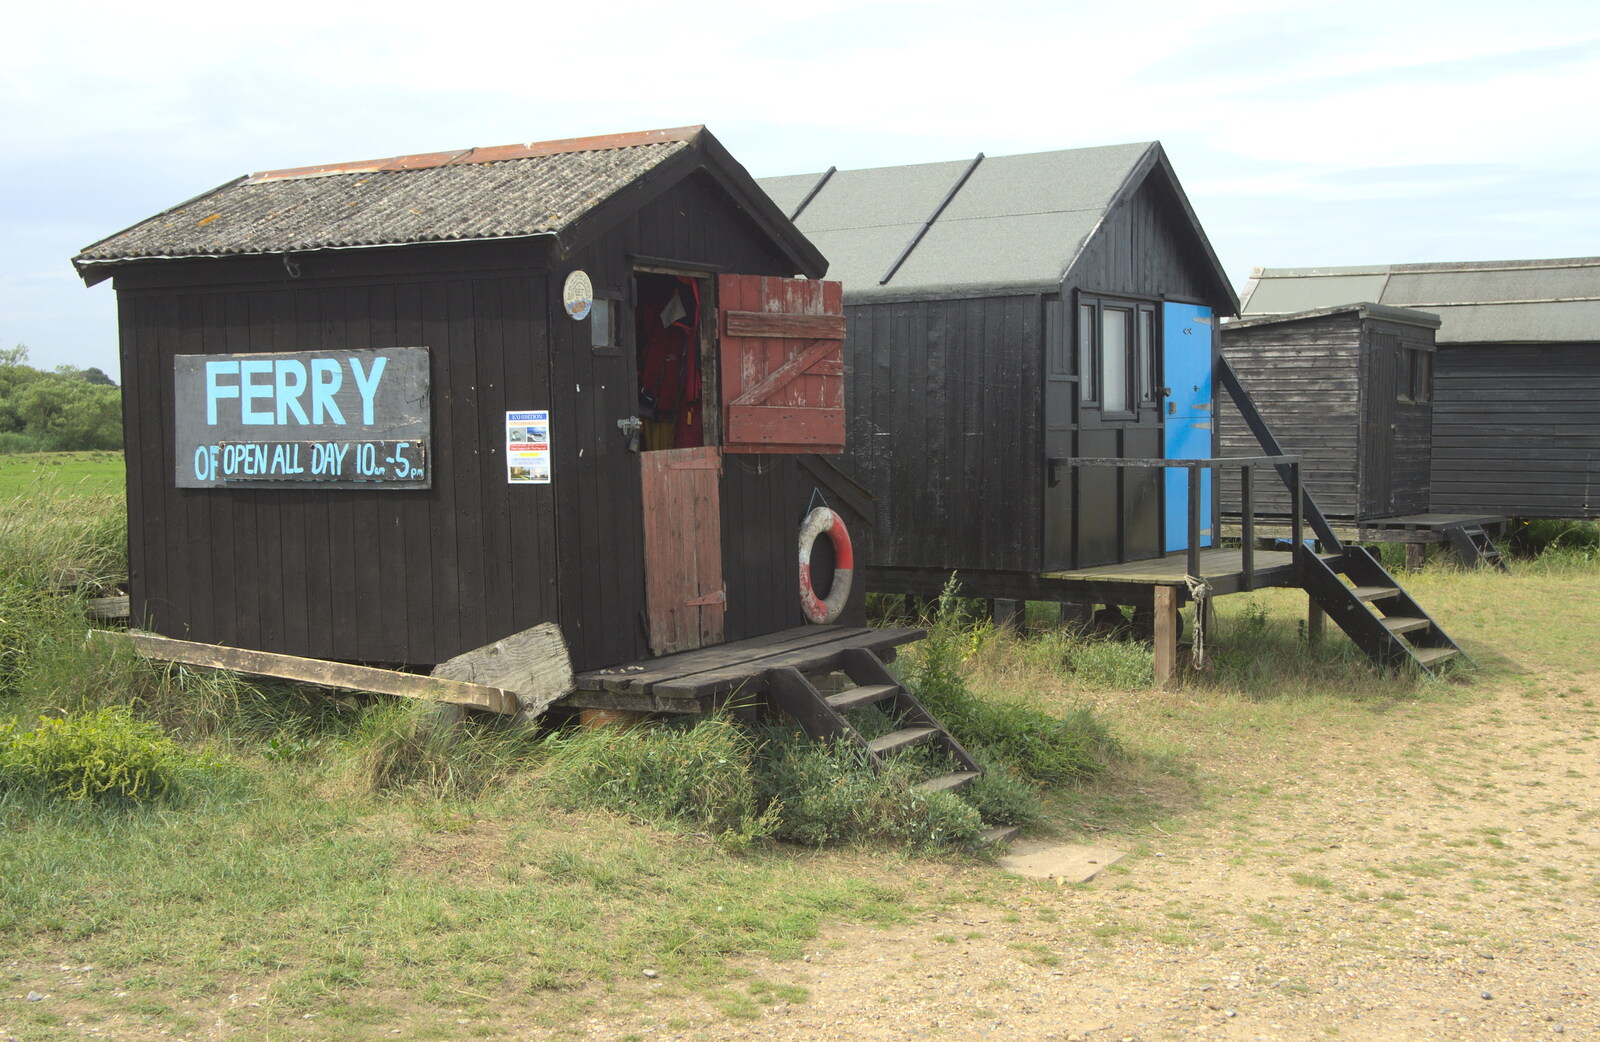 The ferry ticket office from The Danger of Trees: A Camping (Mis)adventure - Southwold, Suffolk - 3rd August 2015